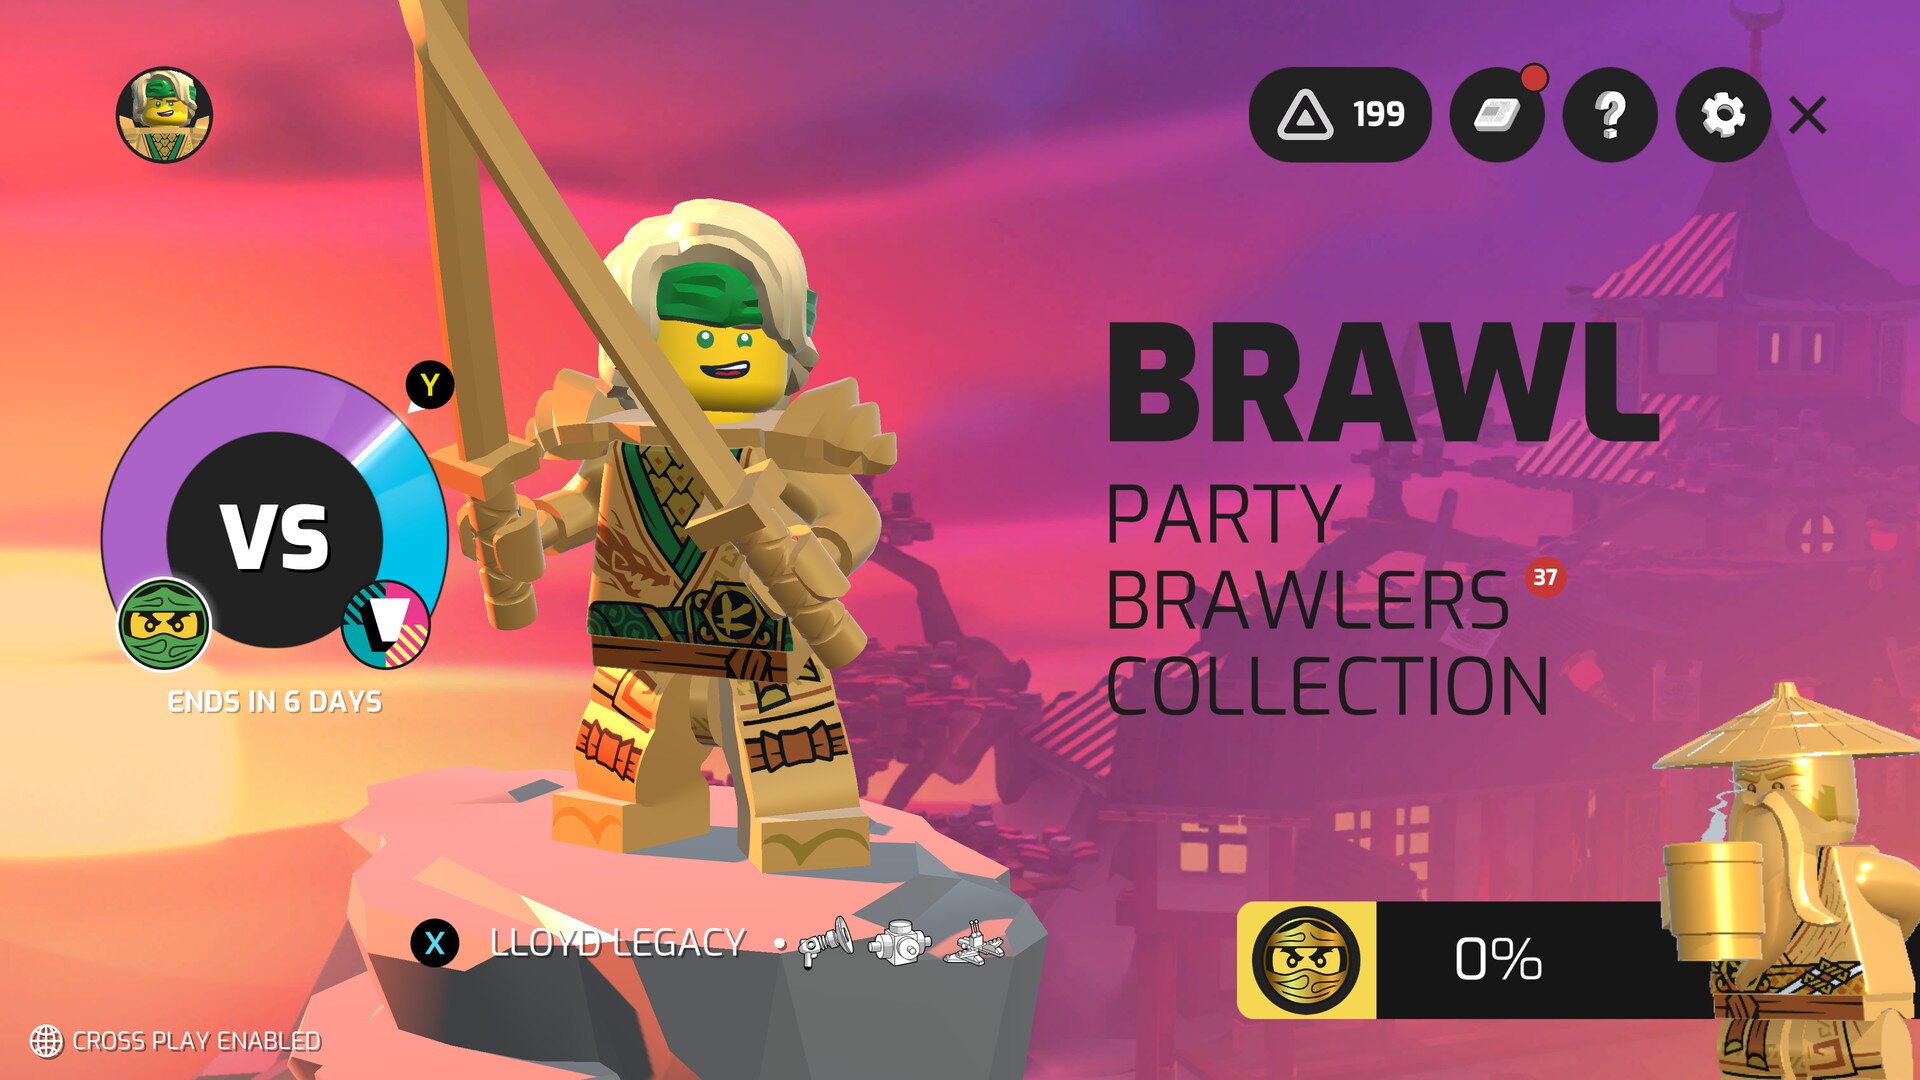 LEGO Brawls download the new version for ios